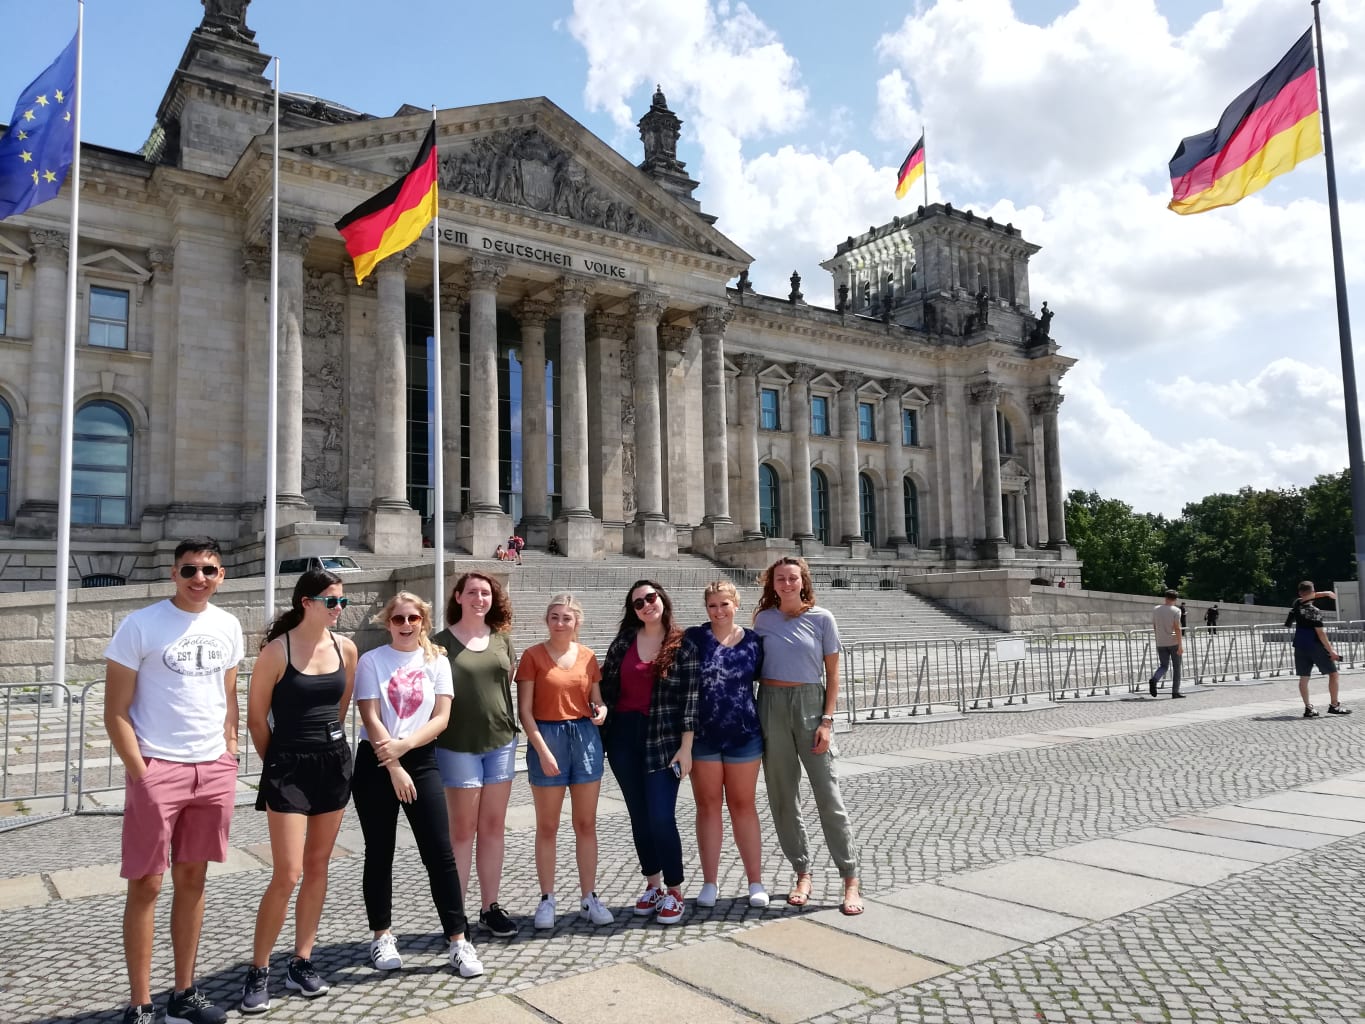 A group of students in front of the Reichstag building in Berlin.